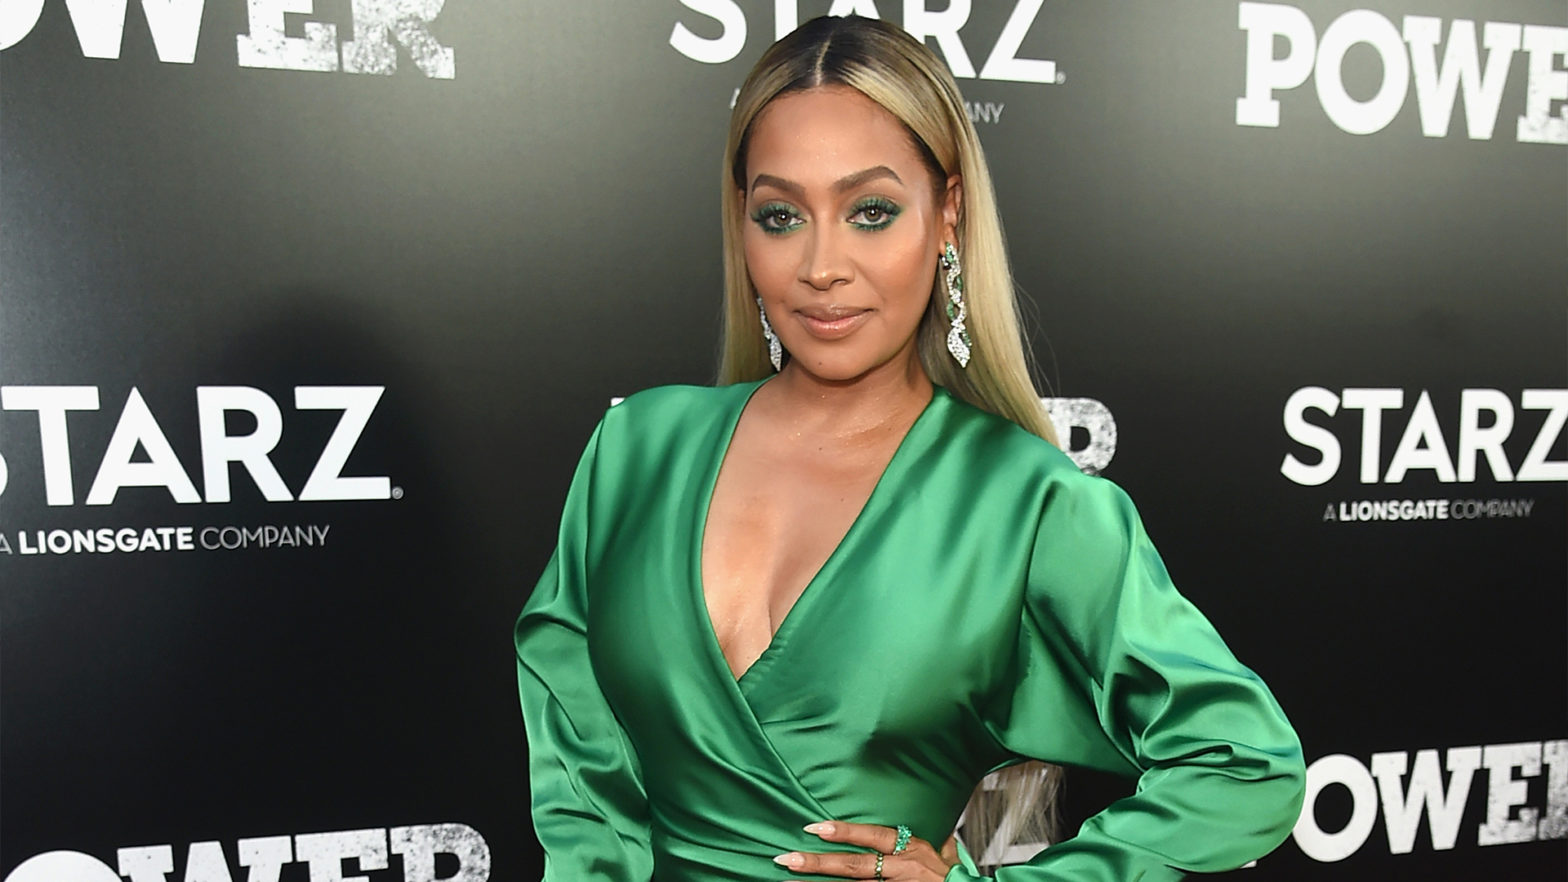 La La Anthony Invests In LEUNE, A Luxury Cannabis Brand Addressing Social Injustice